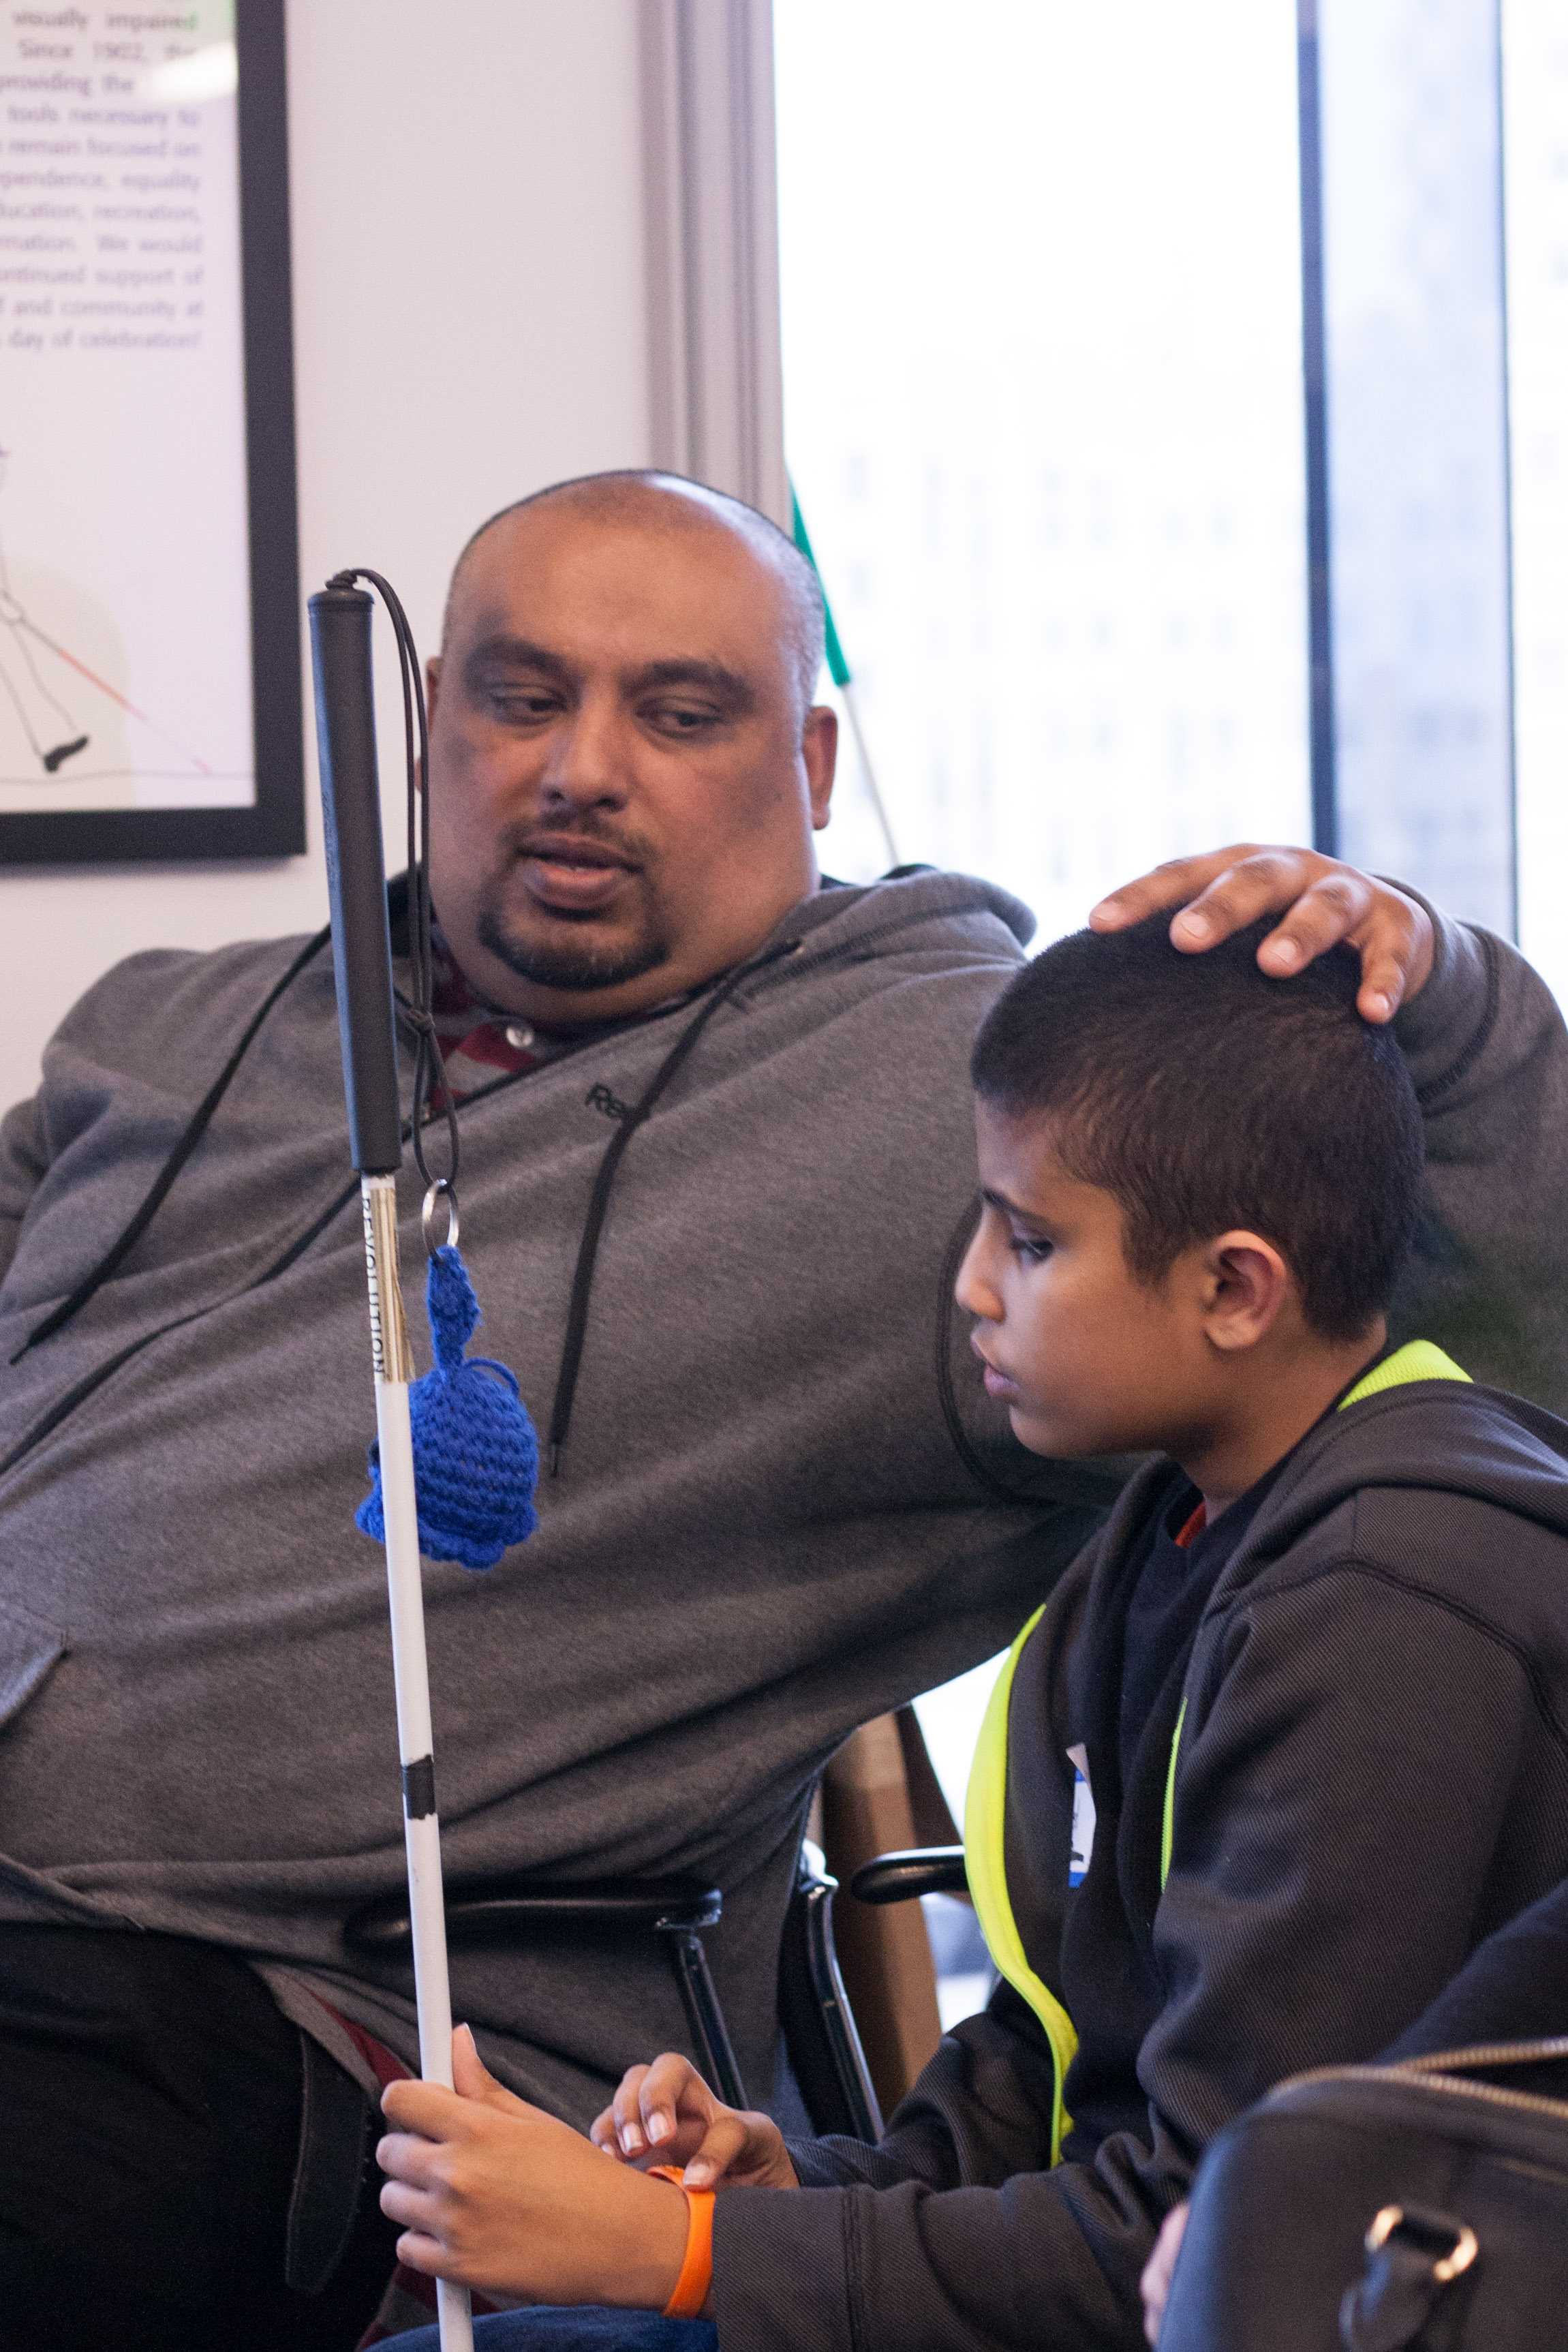 Competitor Rasheed sits next to his dad, who rests a loving hand on his head while speaking to him.